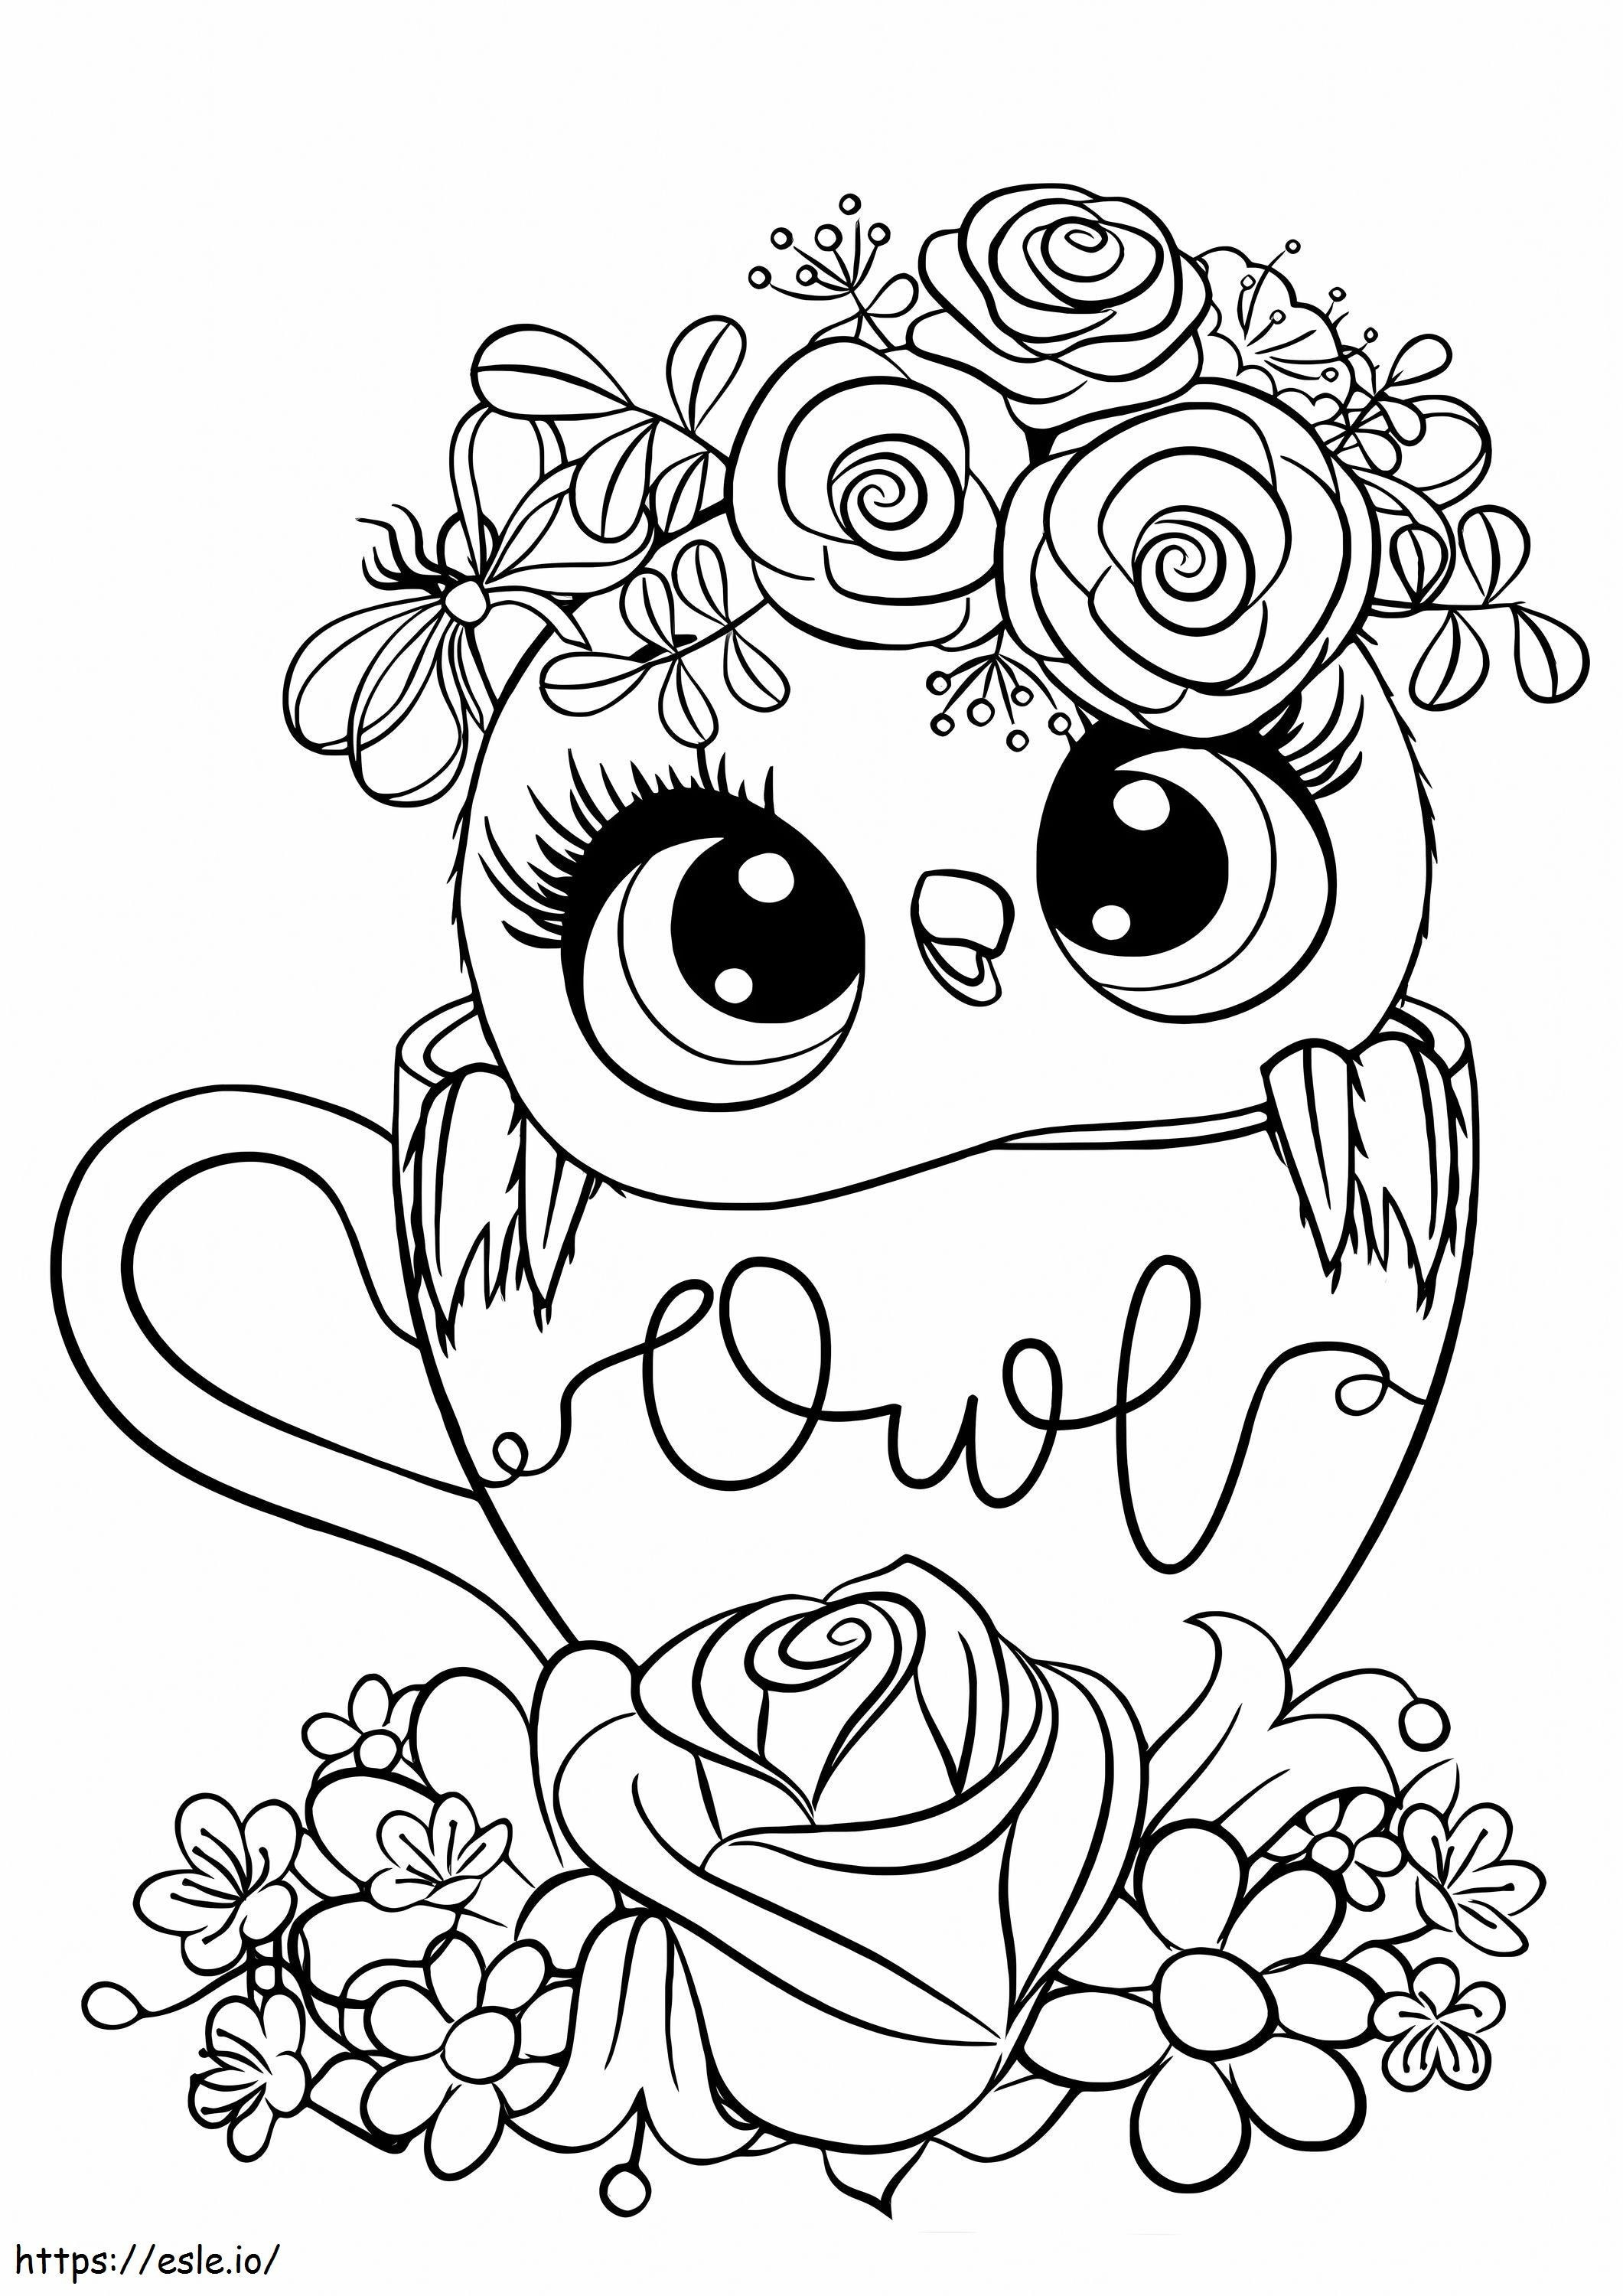 Owl With Flowers coloring page